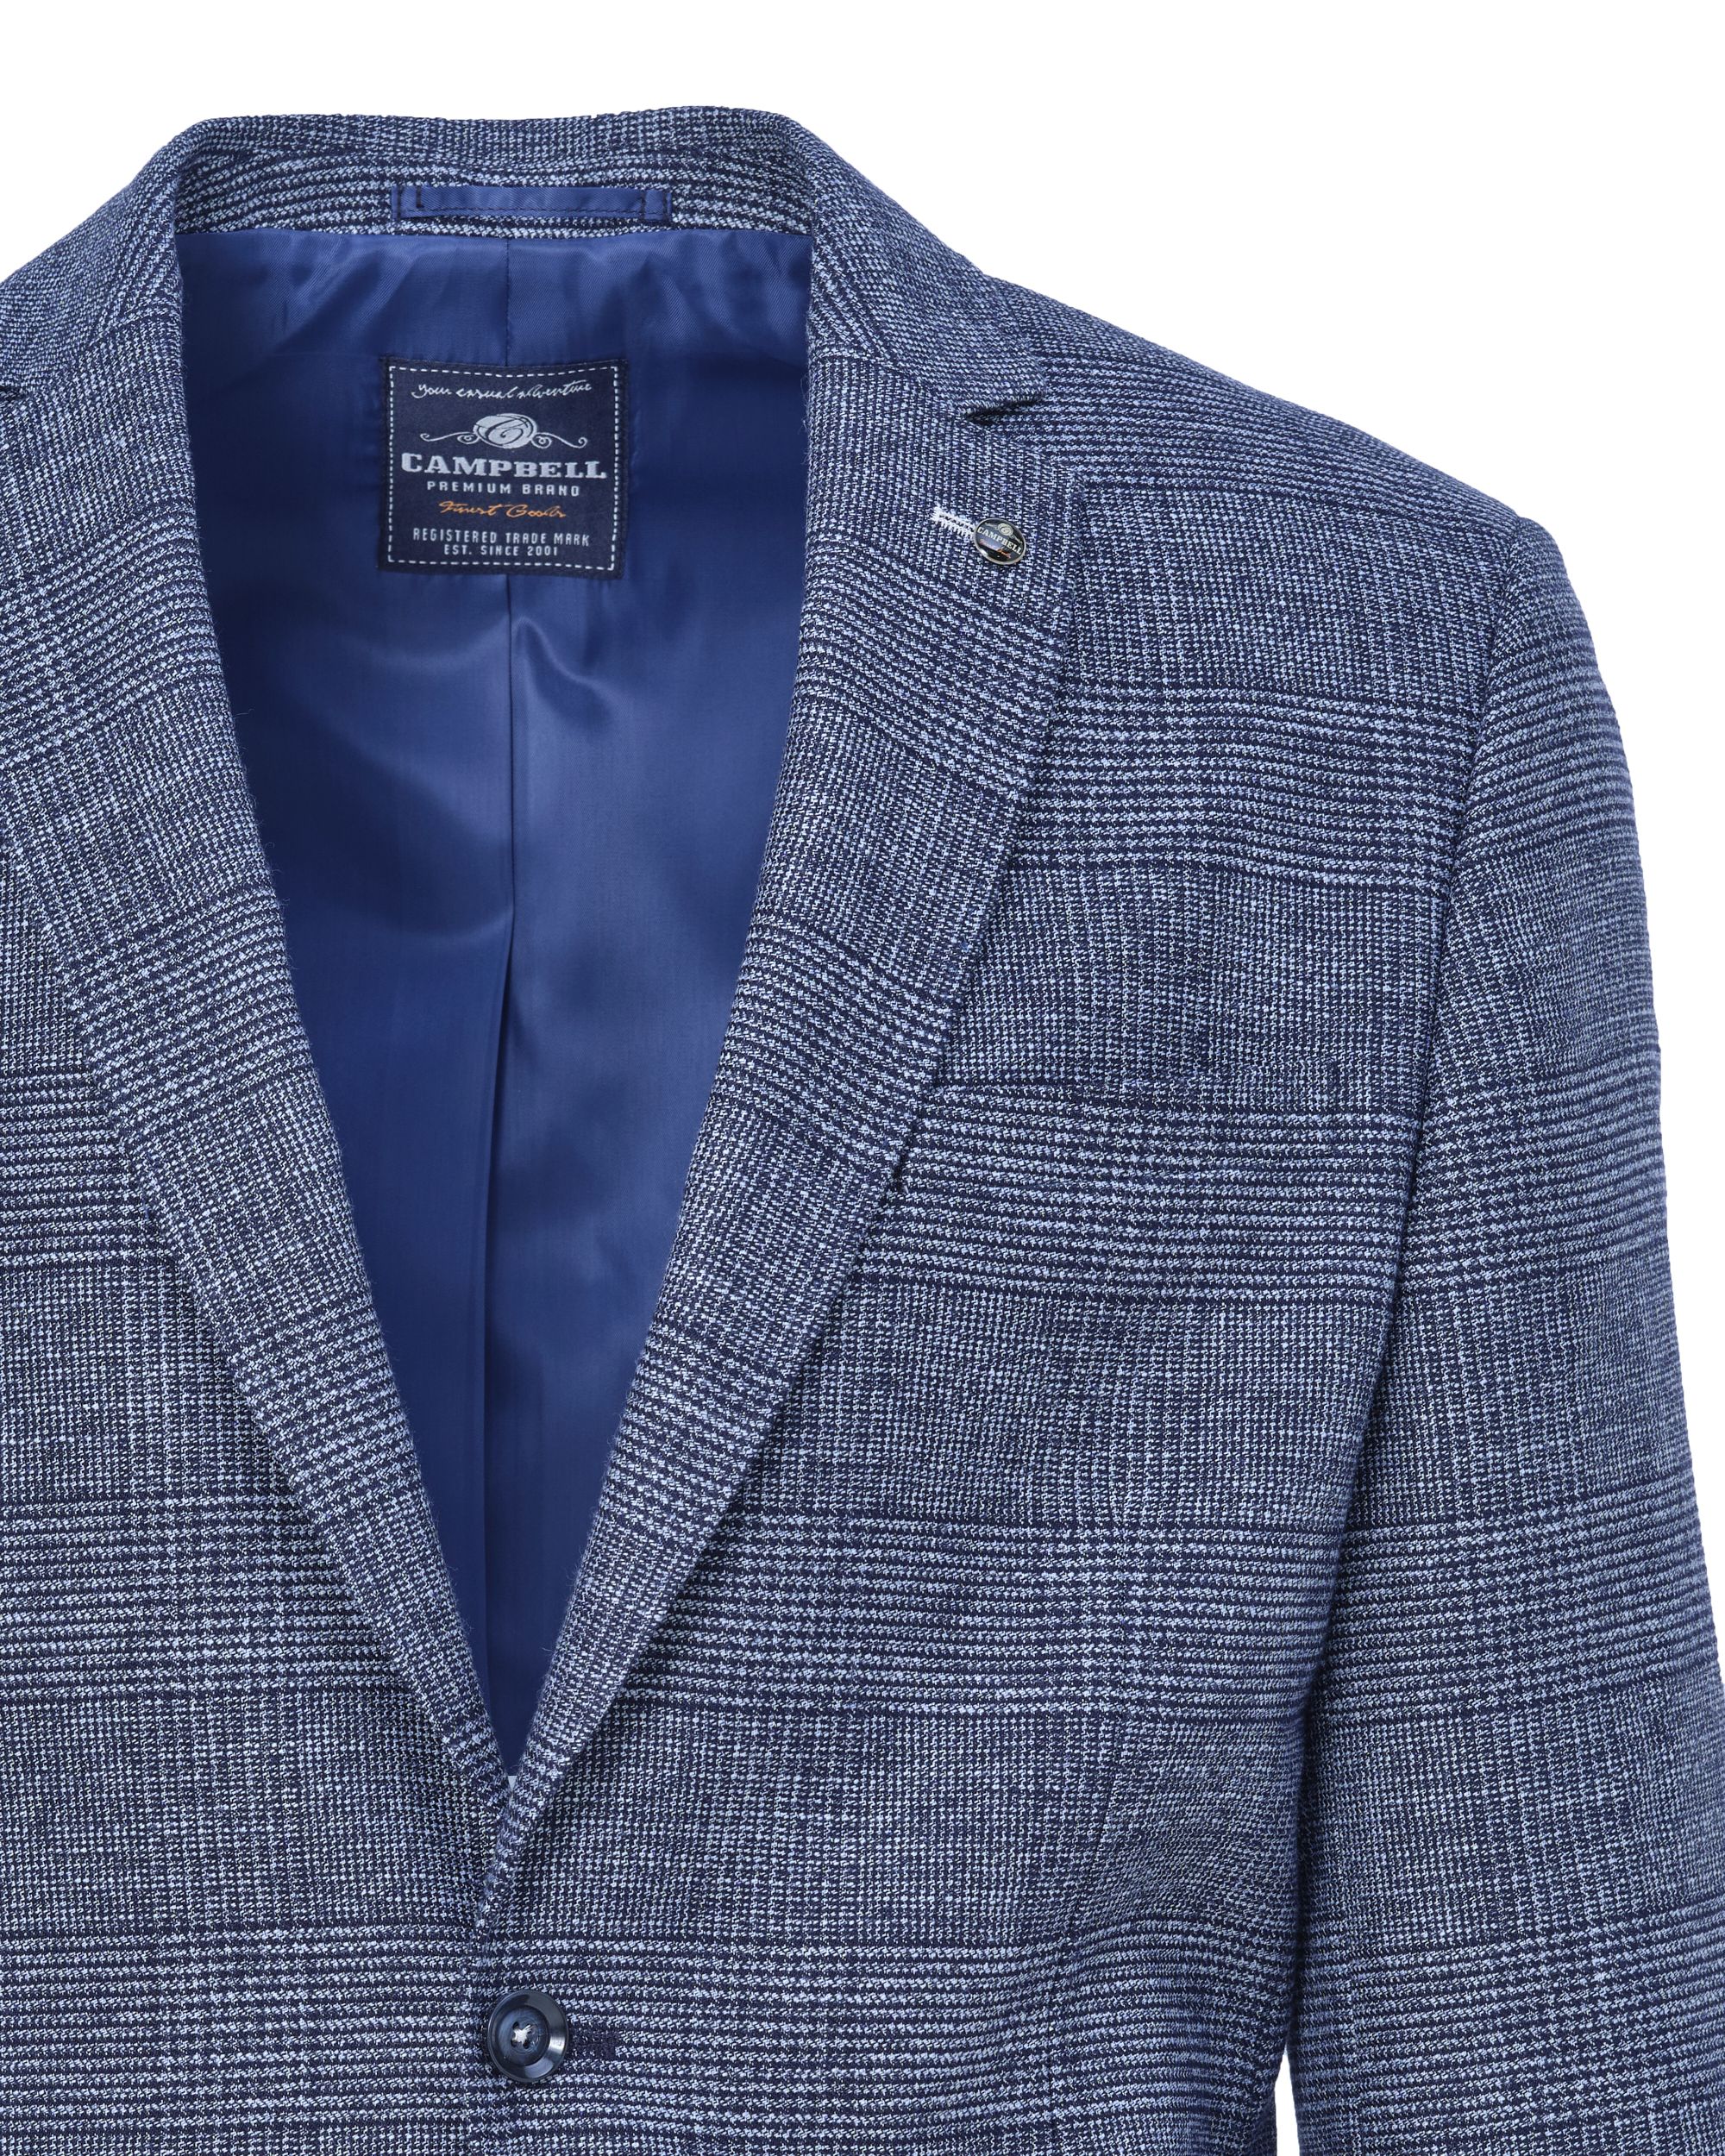 Campbell Classic Blazer Navy grote ruit 084716-001-48